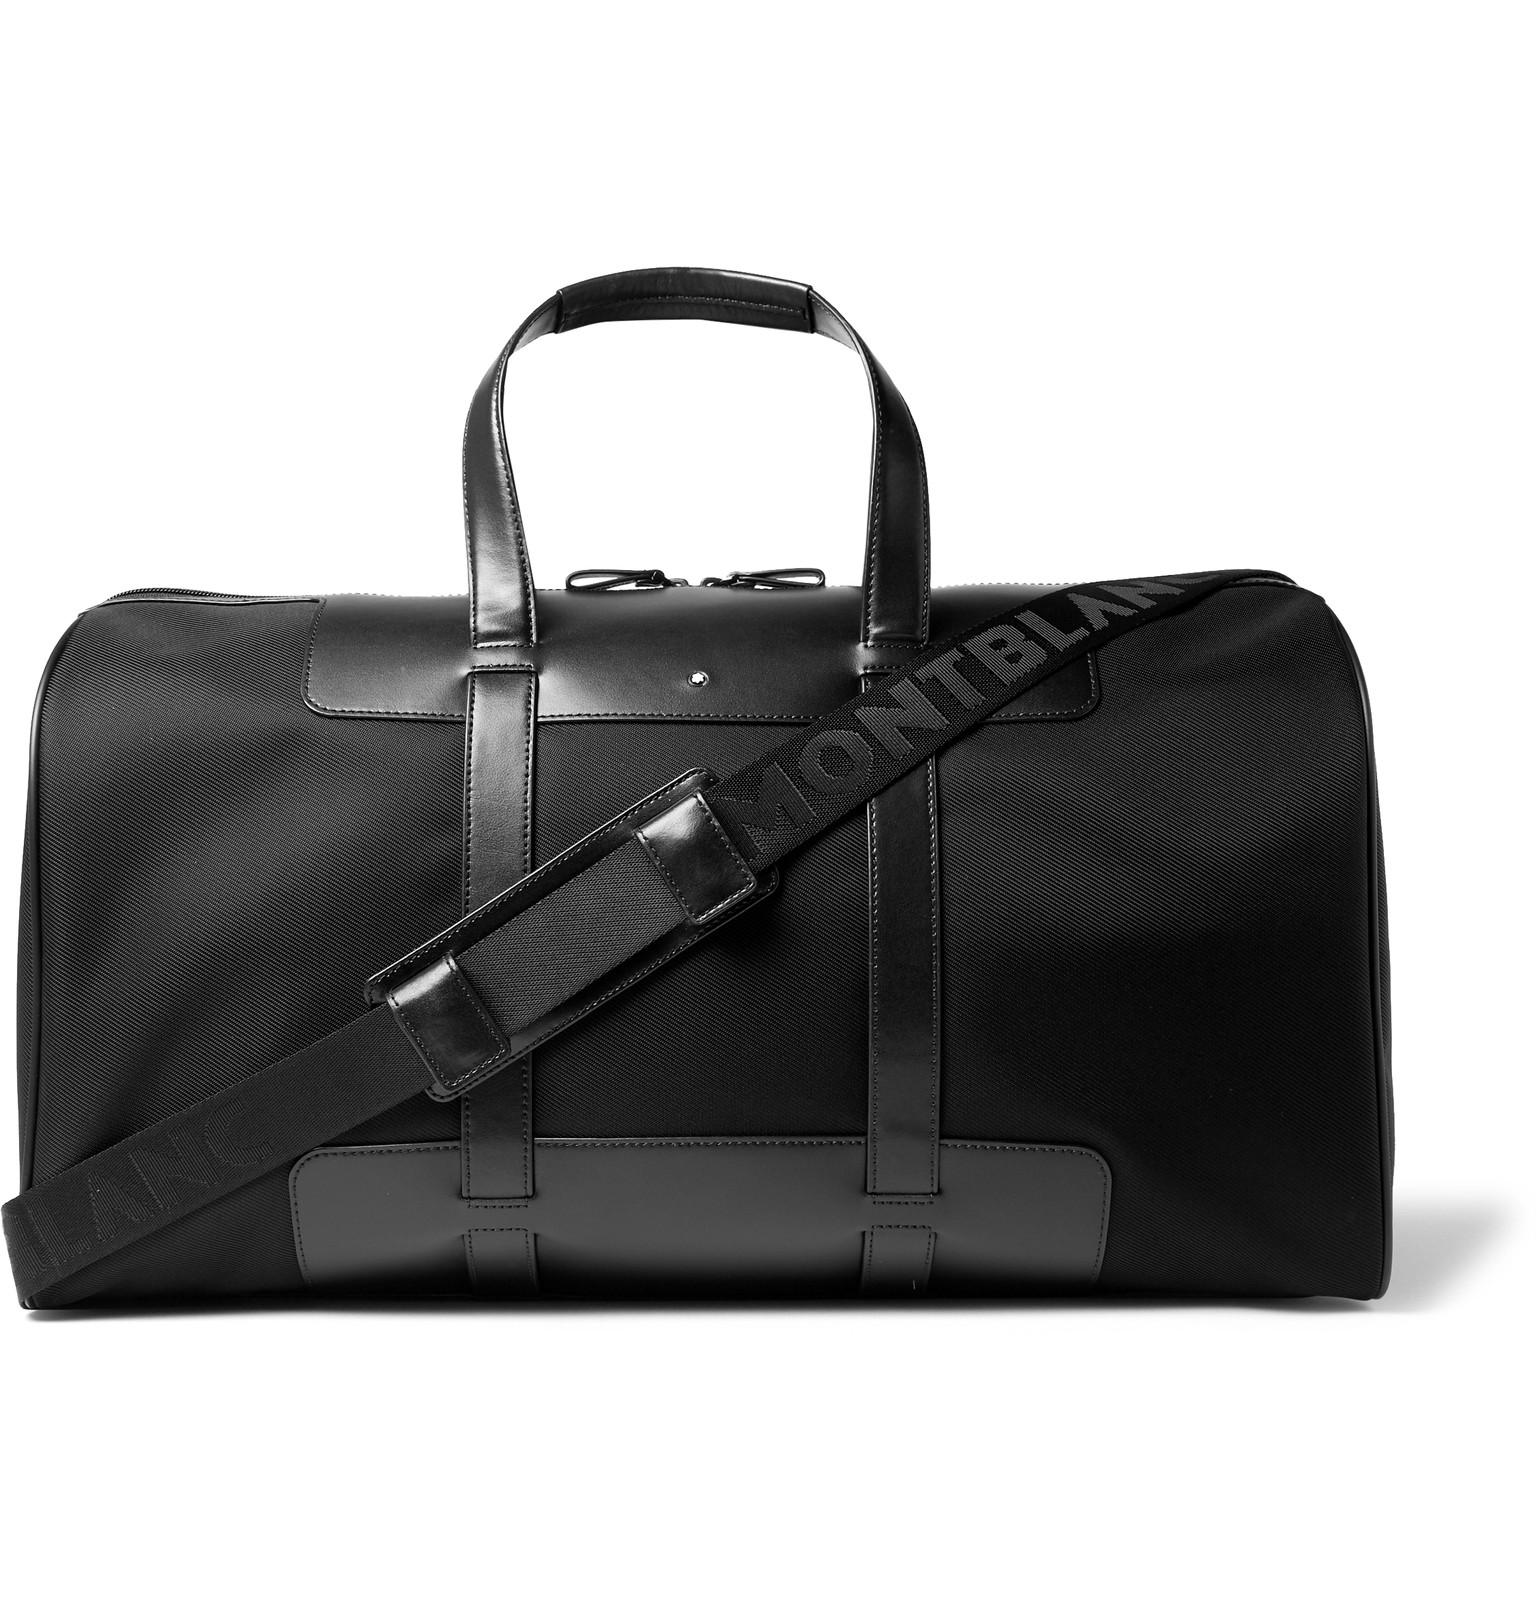 Montblanc Panelled Leather And Canvas Duffle Bag in Black for Men - Lyst